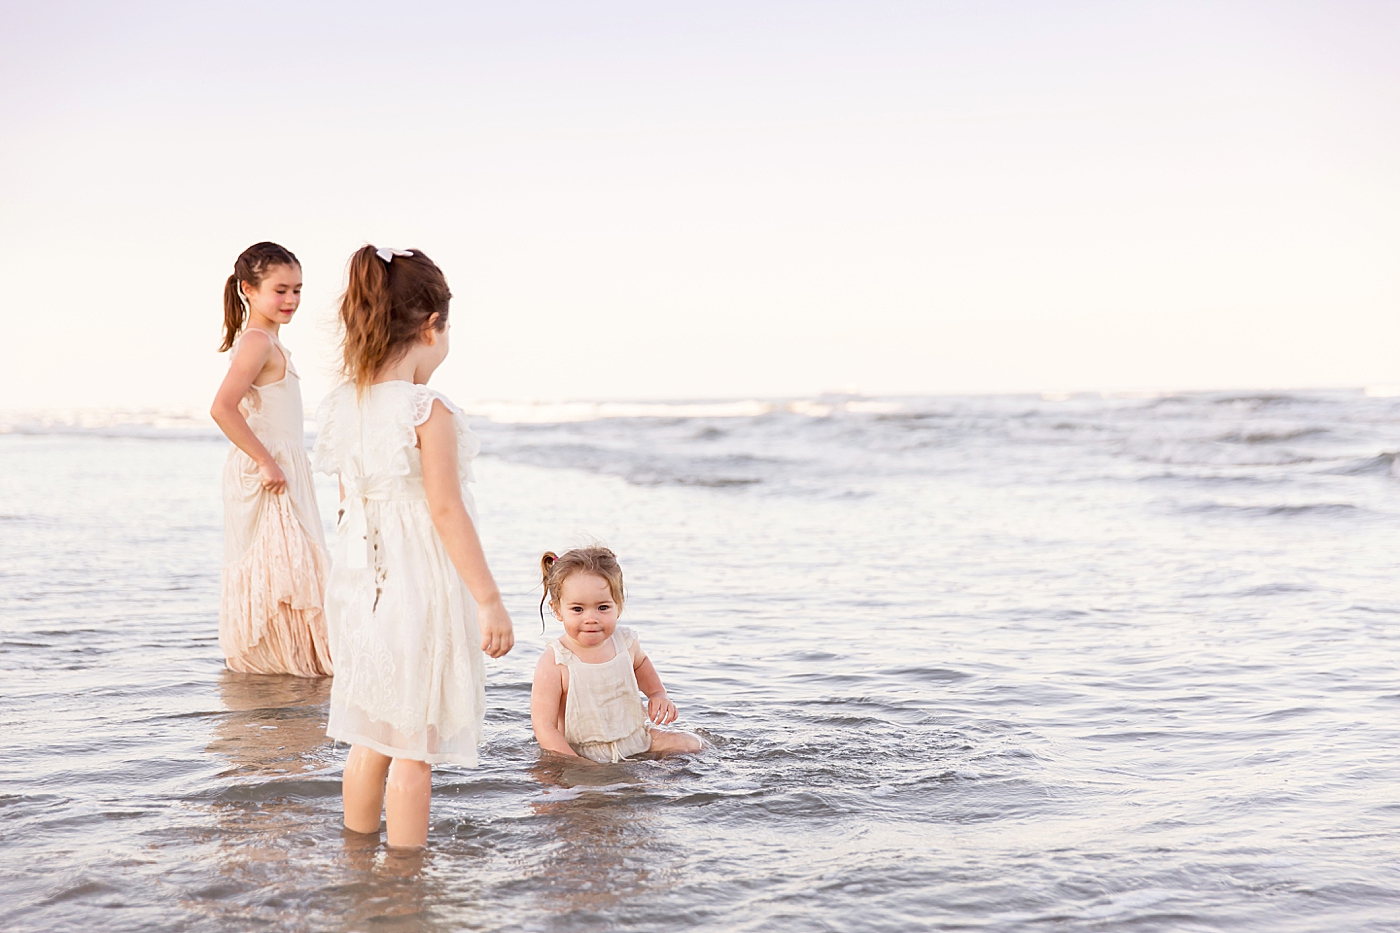 Three sisters having fun playing in the waves. Photos by Fresh Light Photography.